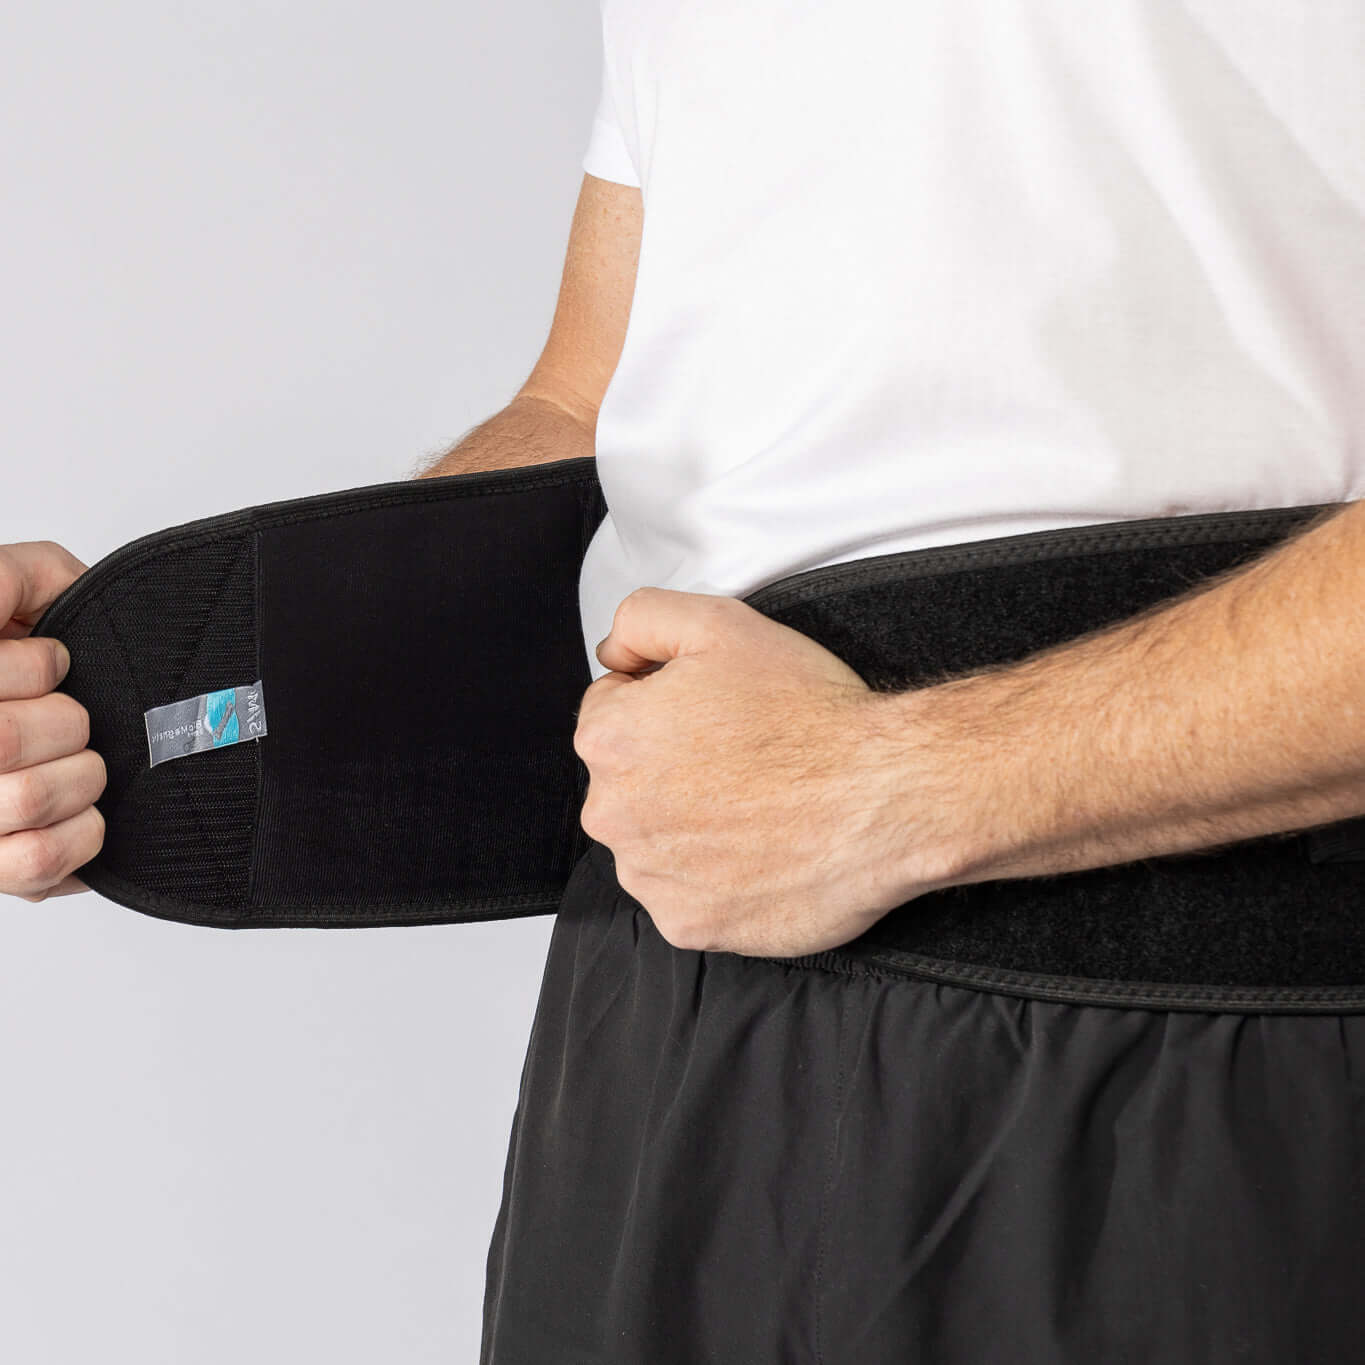 A Man putting on the Bio magnetic Back Support Belt, showing how the front closure folds over for optimal support.